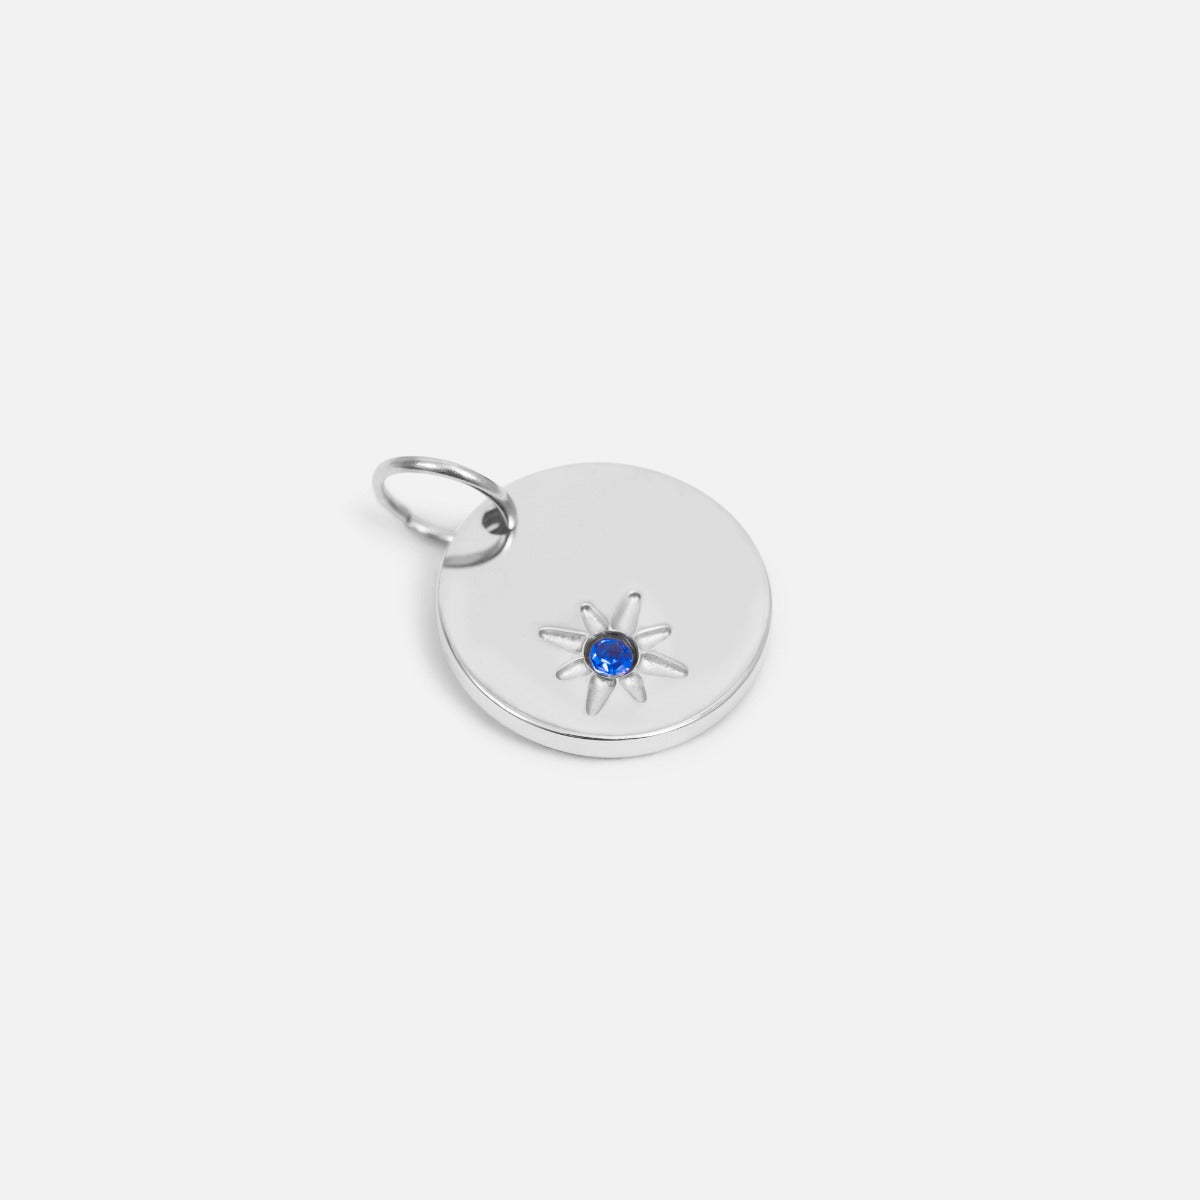 Small symbolic silvered birthstone of september " blue sapphire stone"